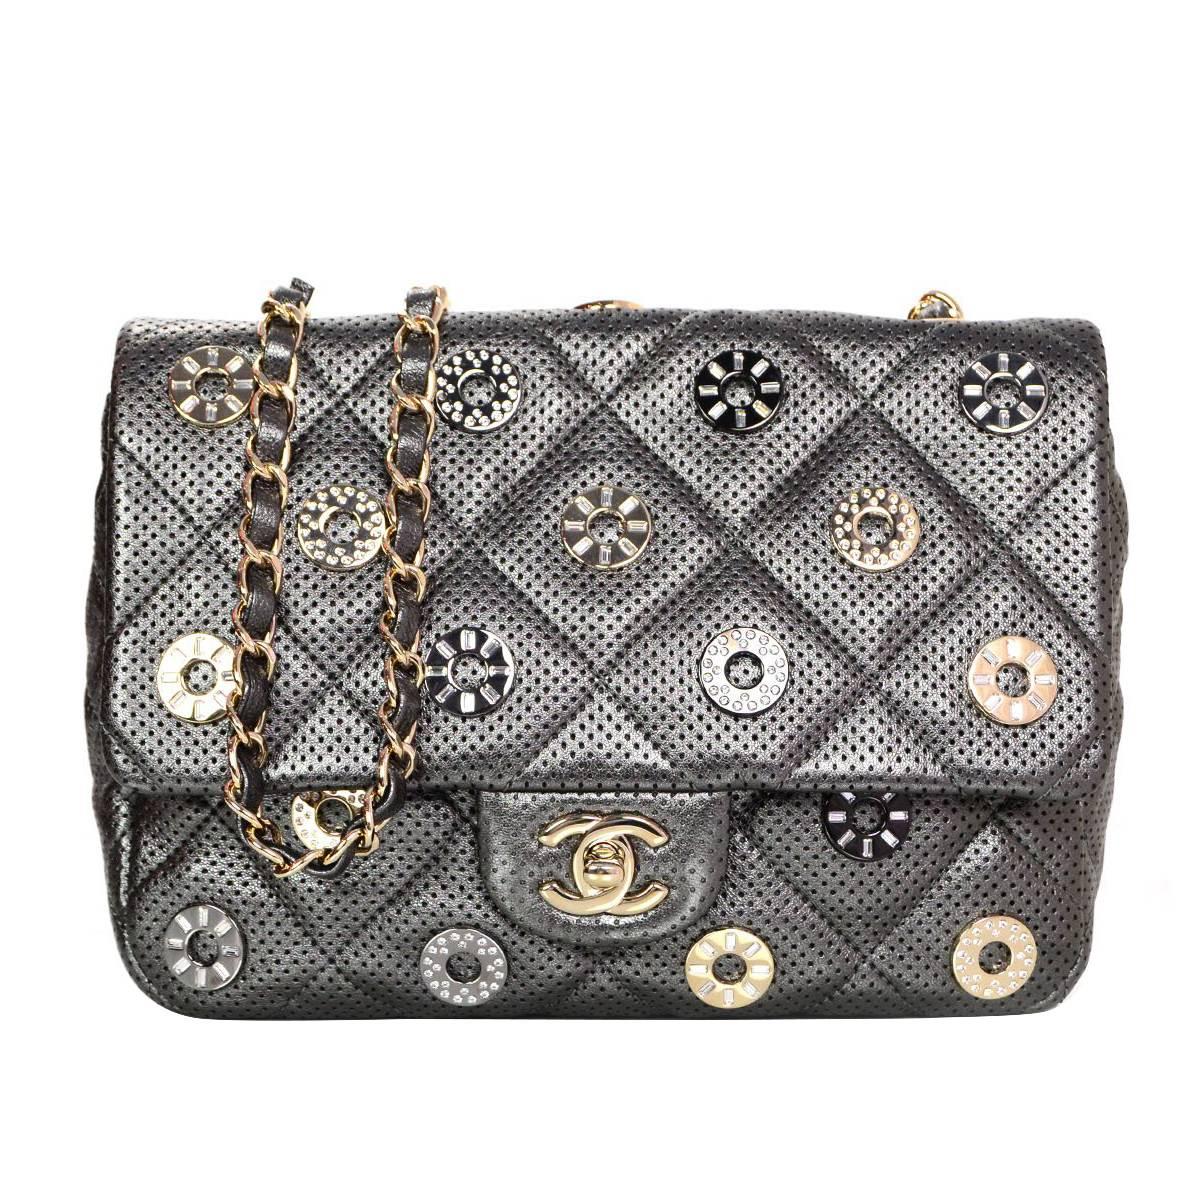 Chanel Pewter Perforated Leather CC Medals Flap Bag